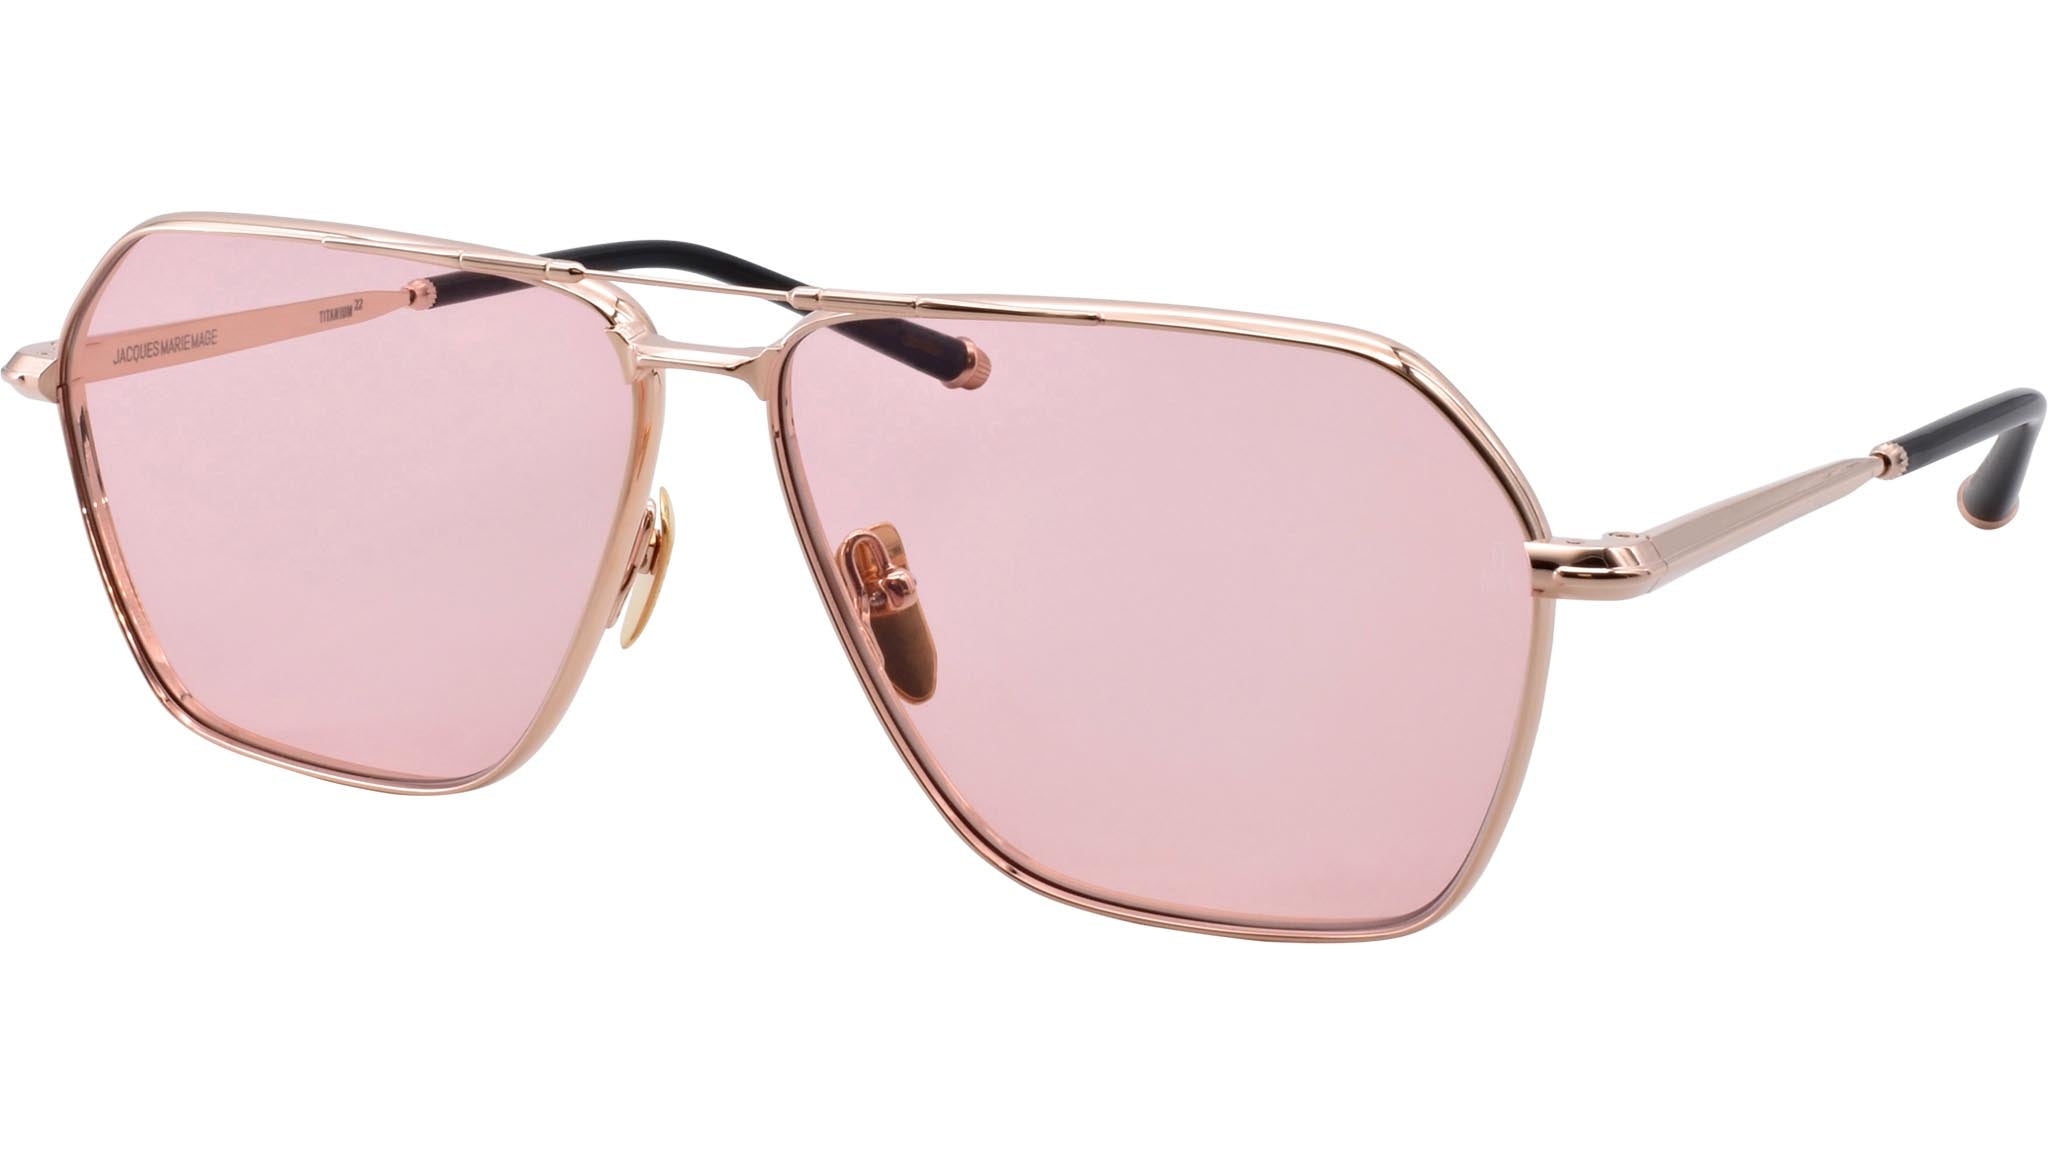 Jacques Marie Mage Stellar Rose Gold Sunglasses